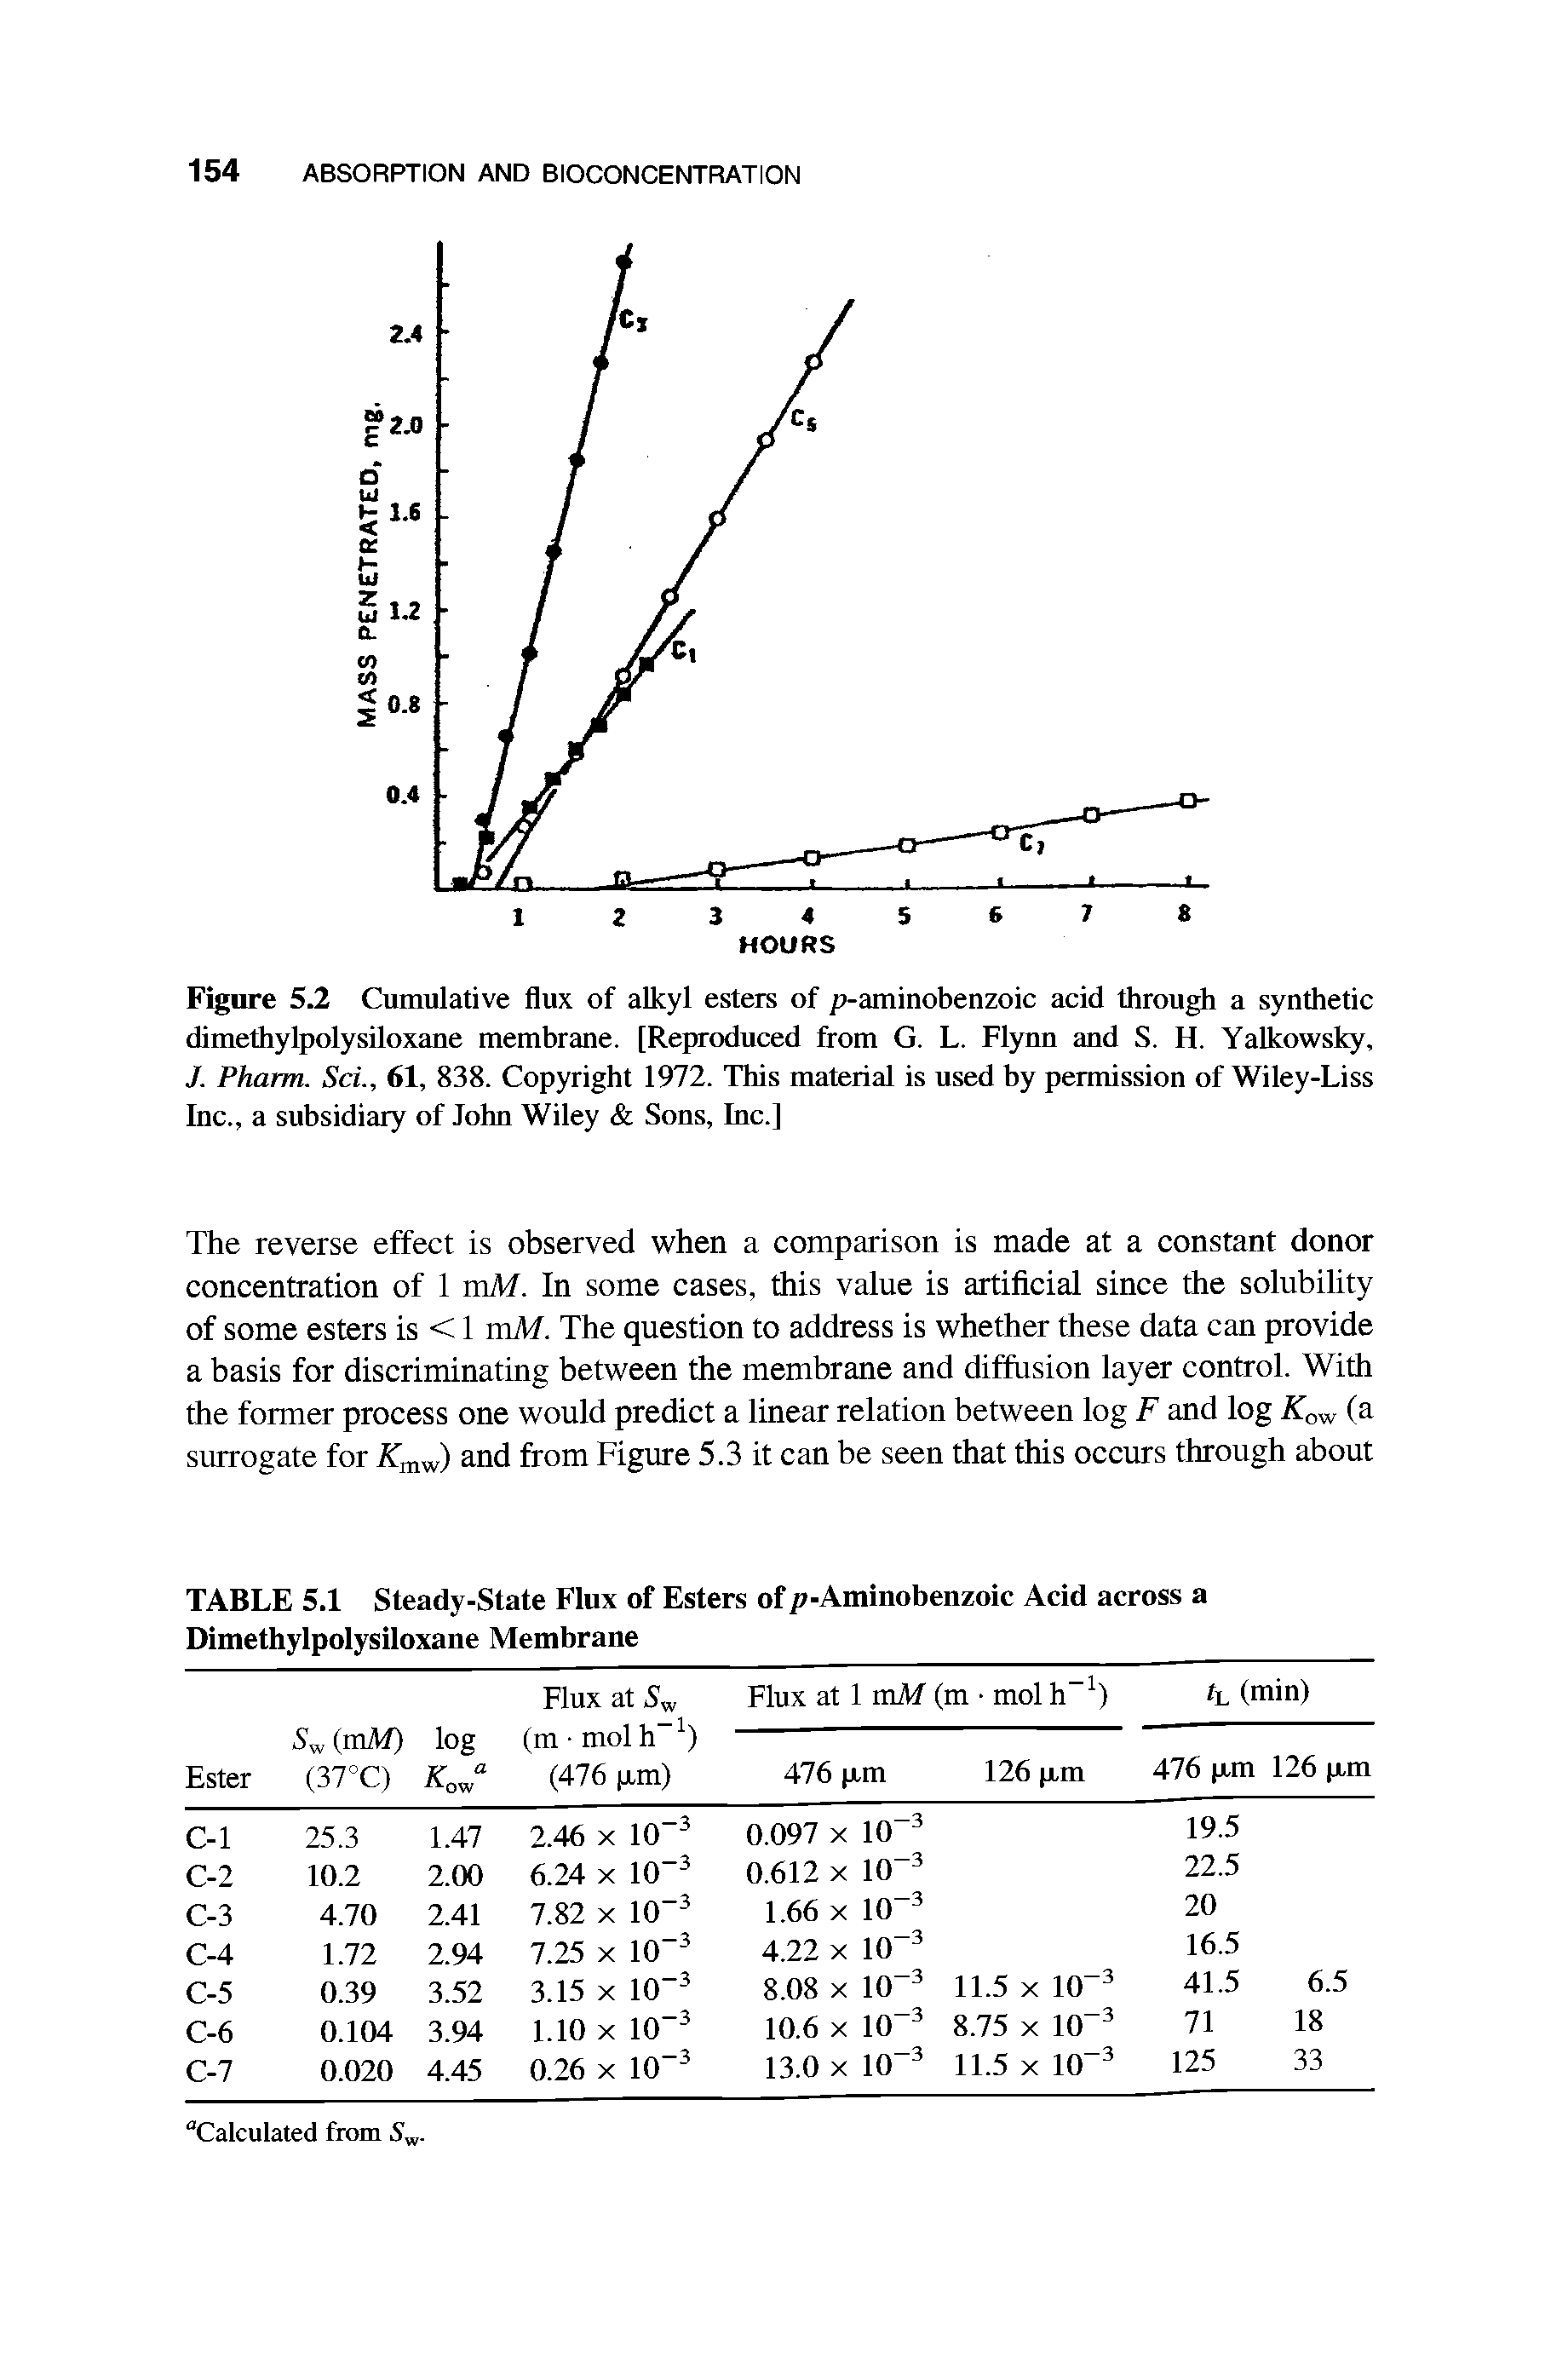 Figure 5.2 Cumulative flux of alkyl esters of p-aminobenzoic acid through a synthetic dimethylpolysiloxane membrane. [Reproduced from G. L. Flynn and S. H. Yalkowsky, J. Pharm. Set, 61, 838. Copyright 1972. This material is used by permission of Wiley-Liss Inc., a subsidiary of John Wiley Sons, Inc.]...